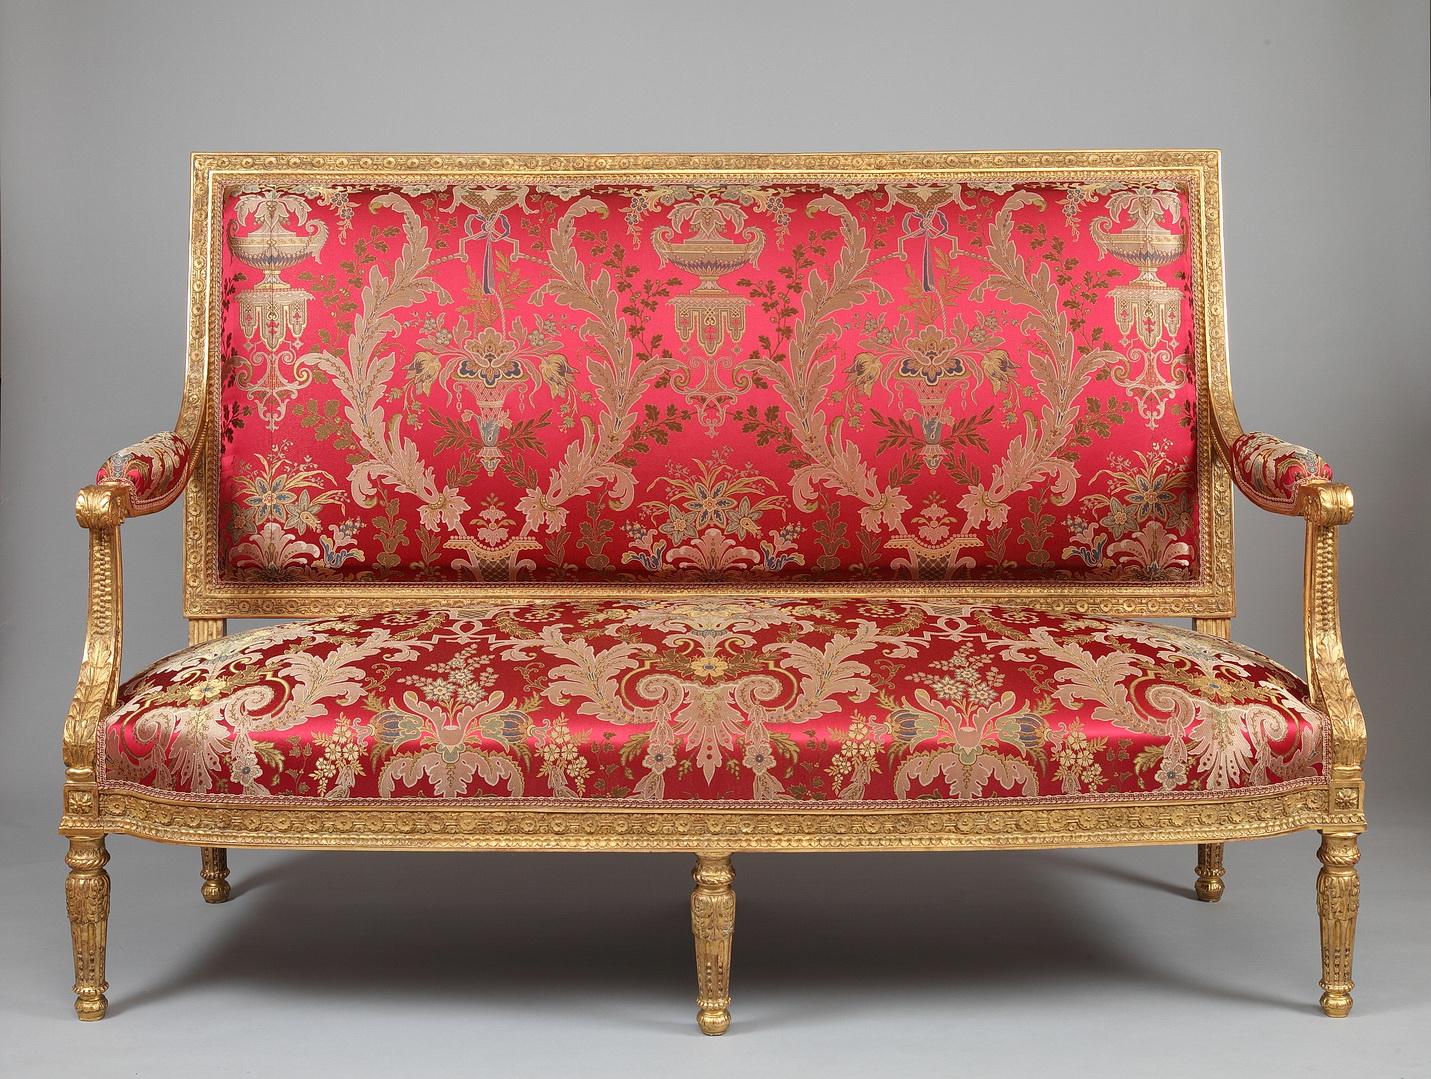 Richly carved giltwood sofa, upholstered with a Tassinari & Chatel red silk ornamented with flowers and central medallions, imagined after the 1788 model made by G. Jacob for the Castle St Cloud.